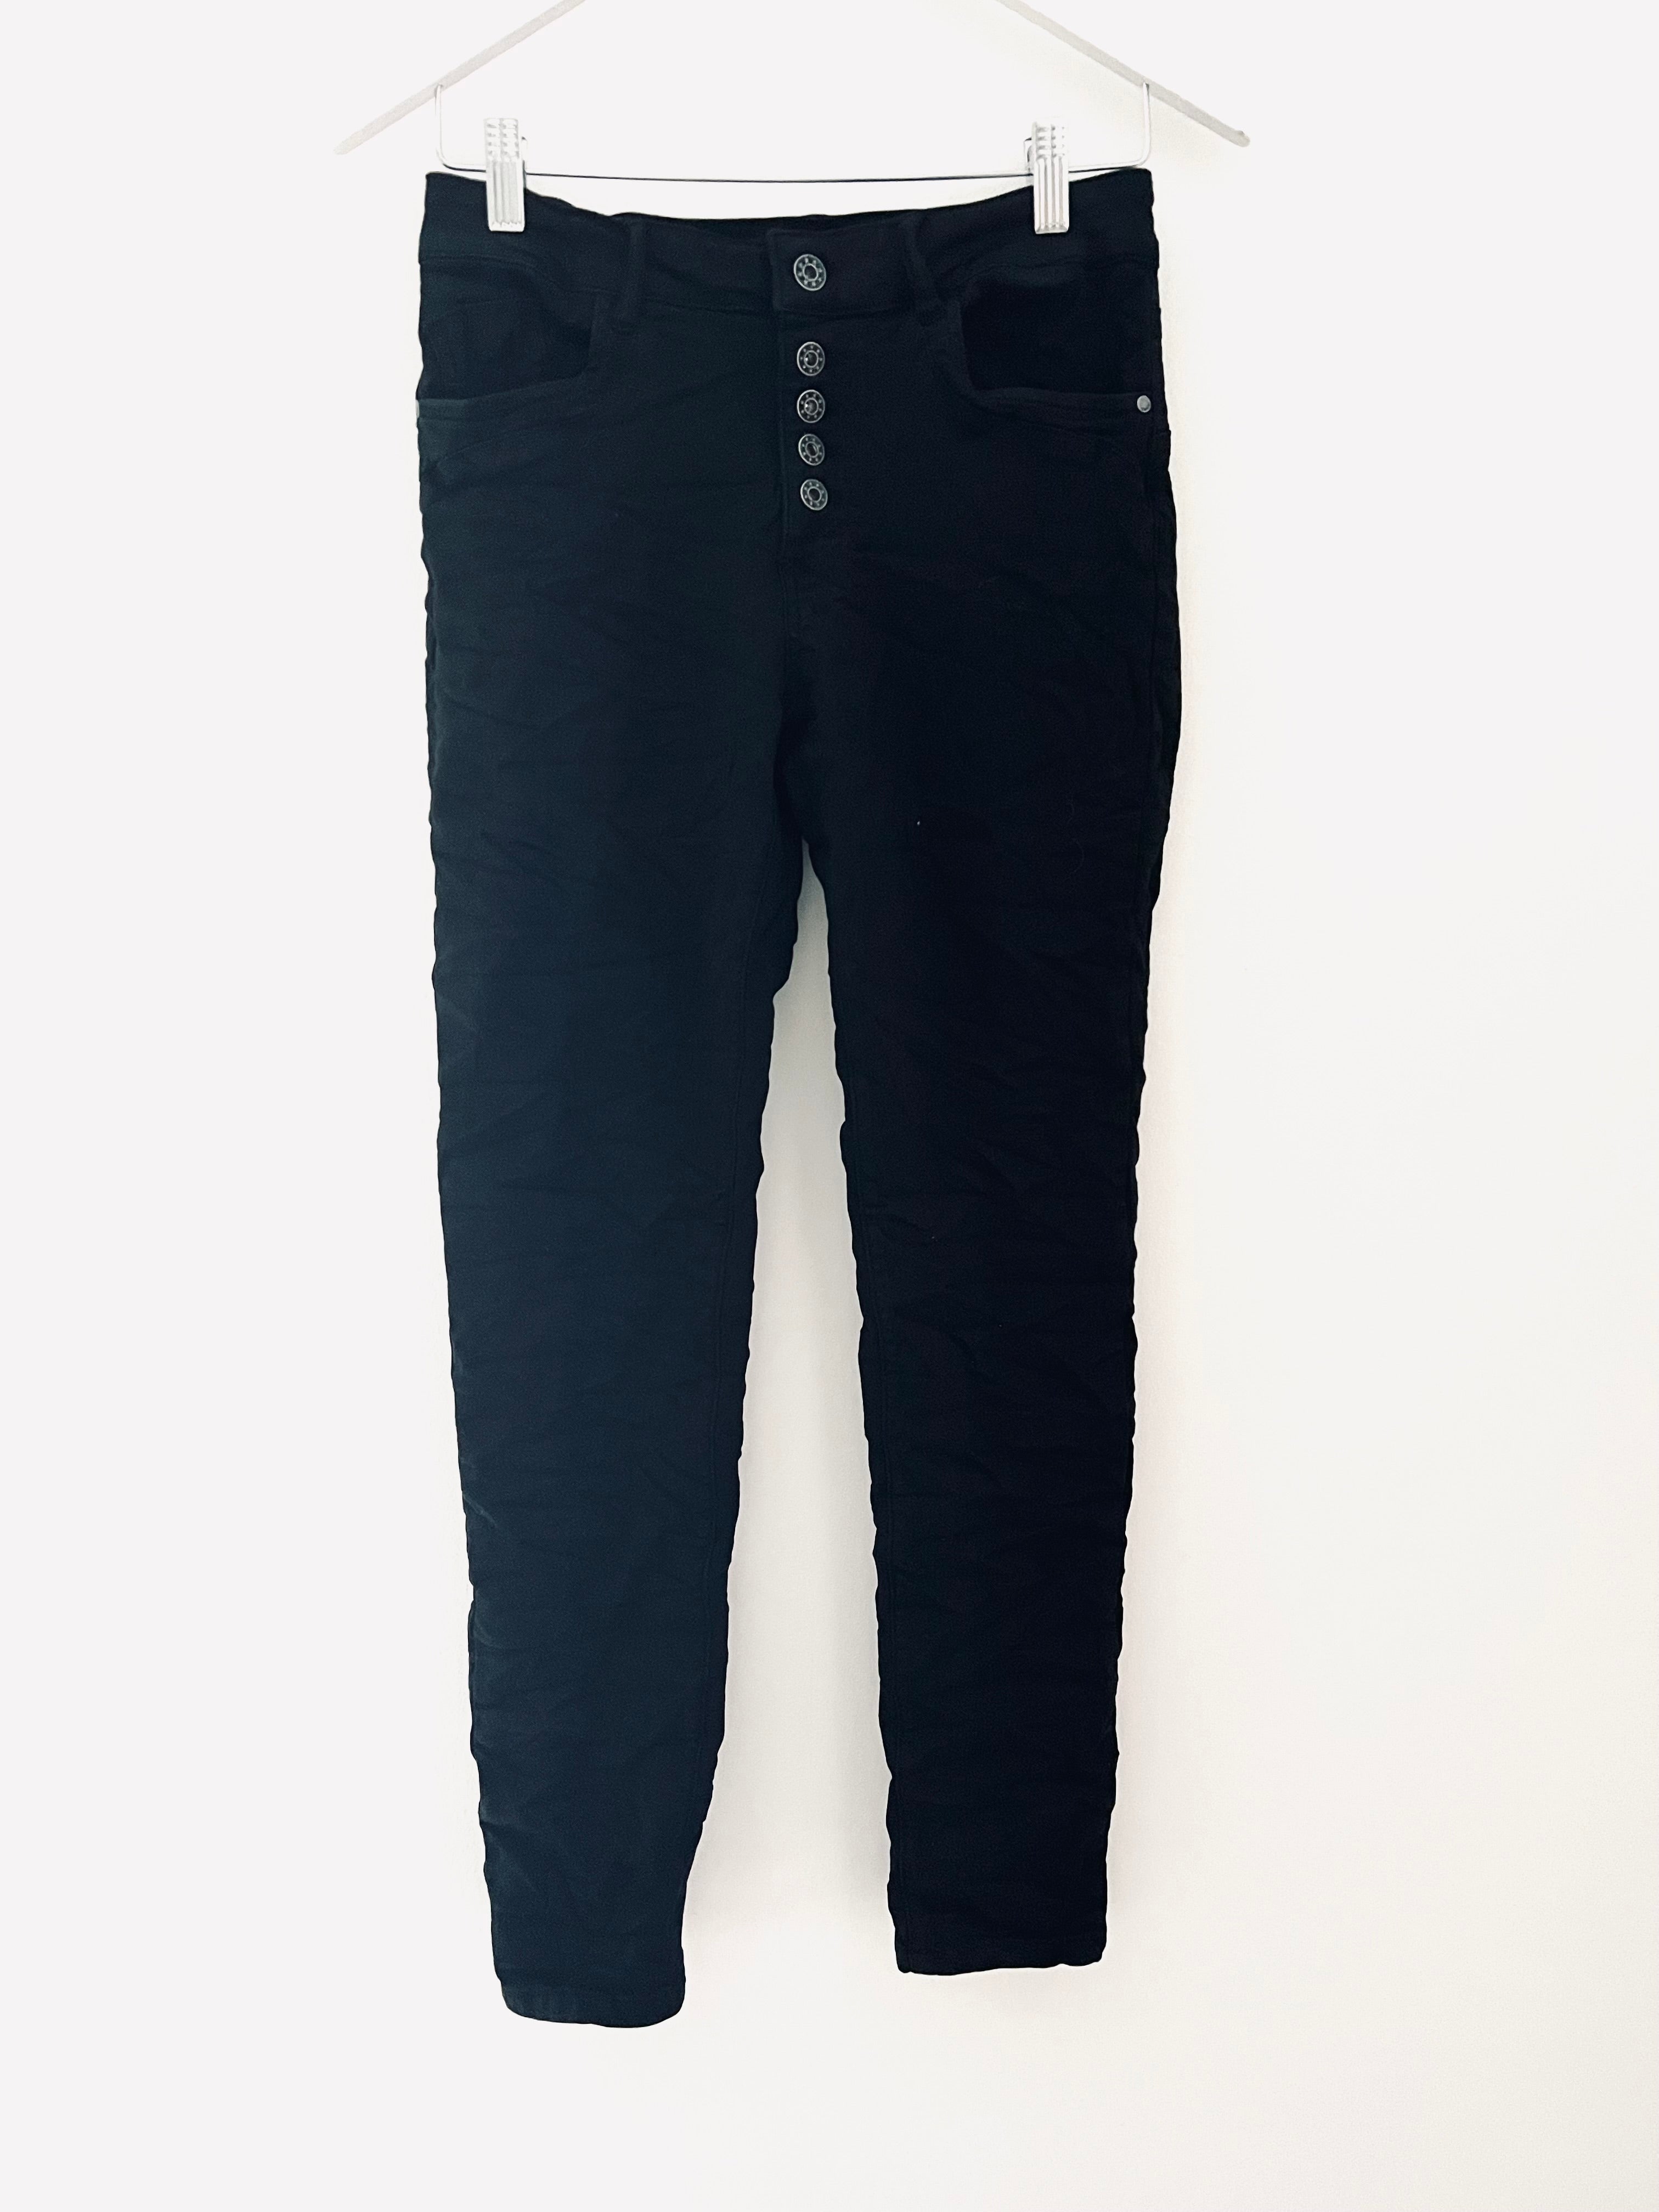 Button Fly Stretch Jeans in Black